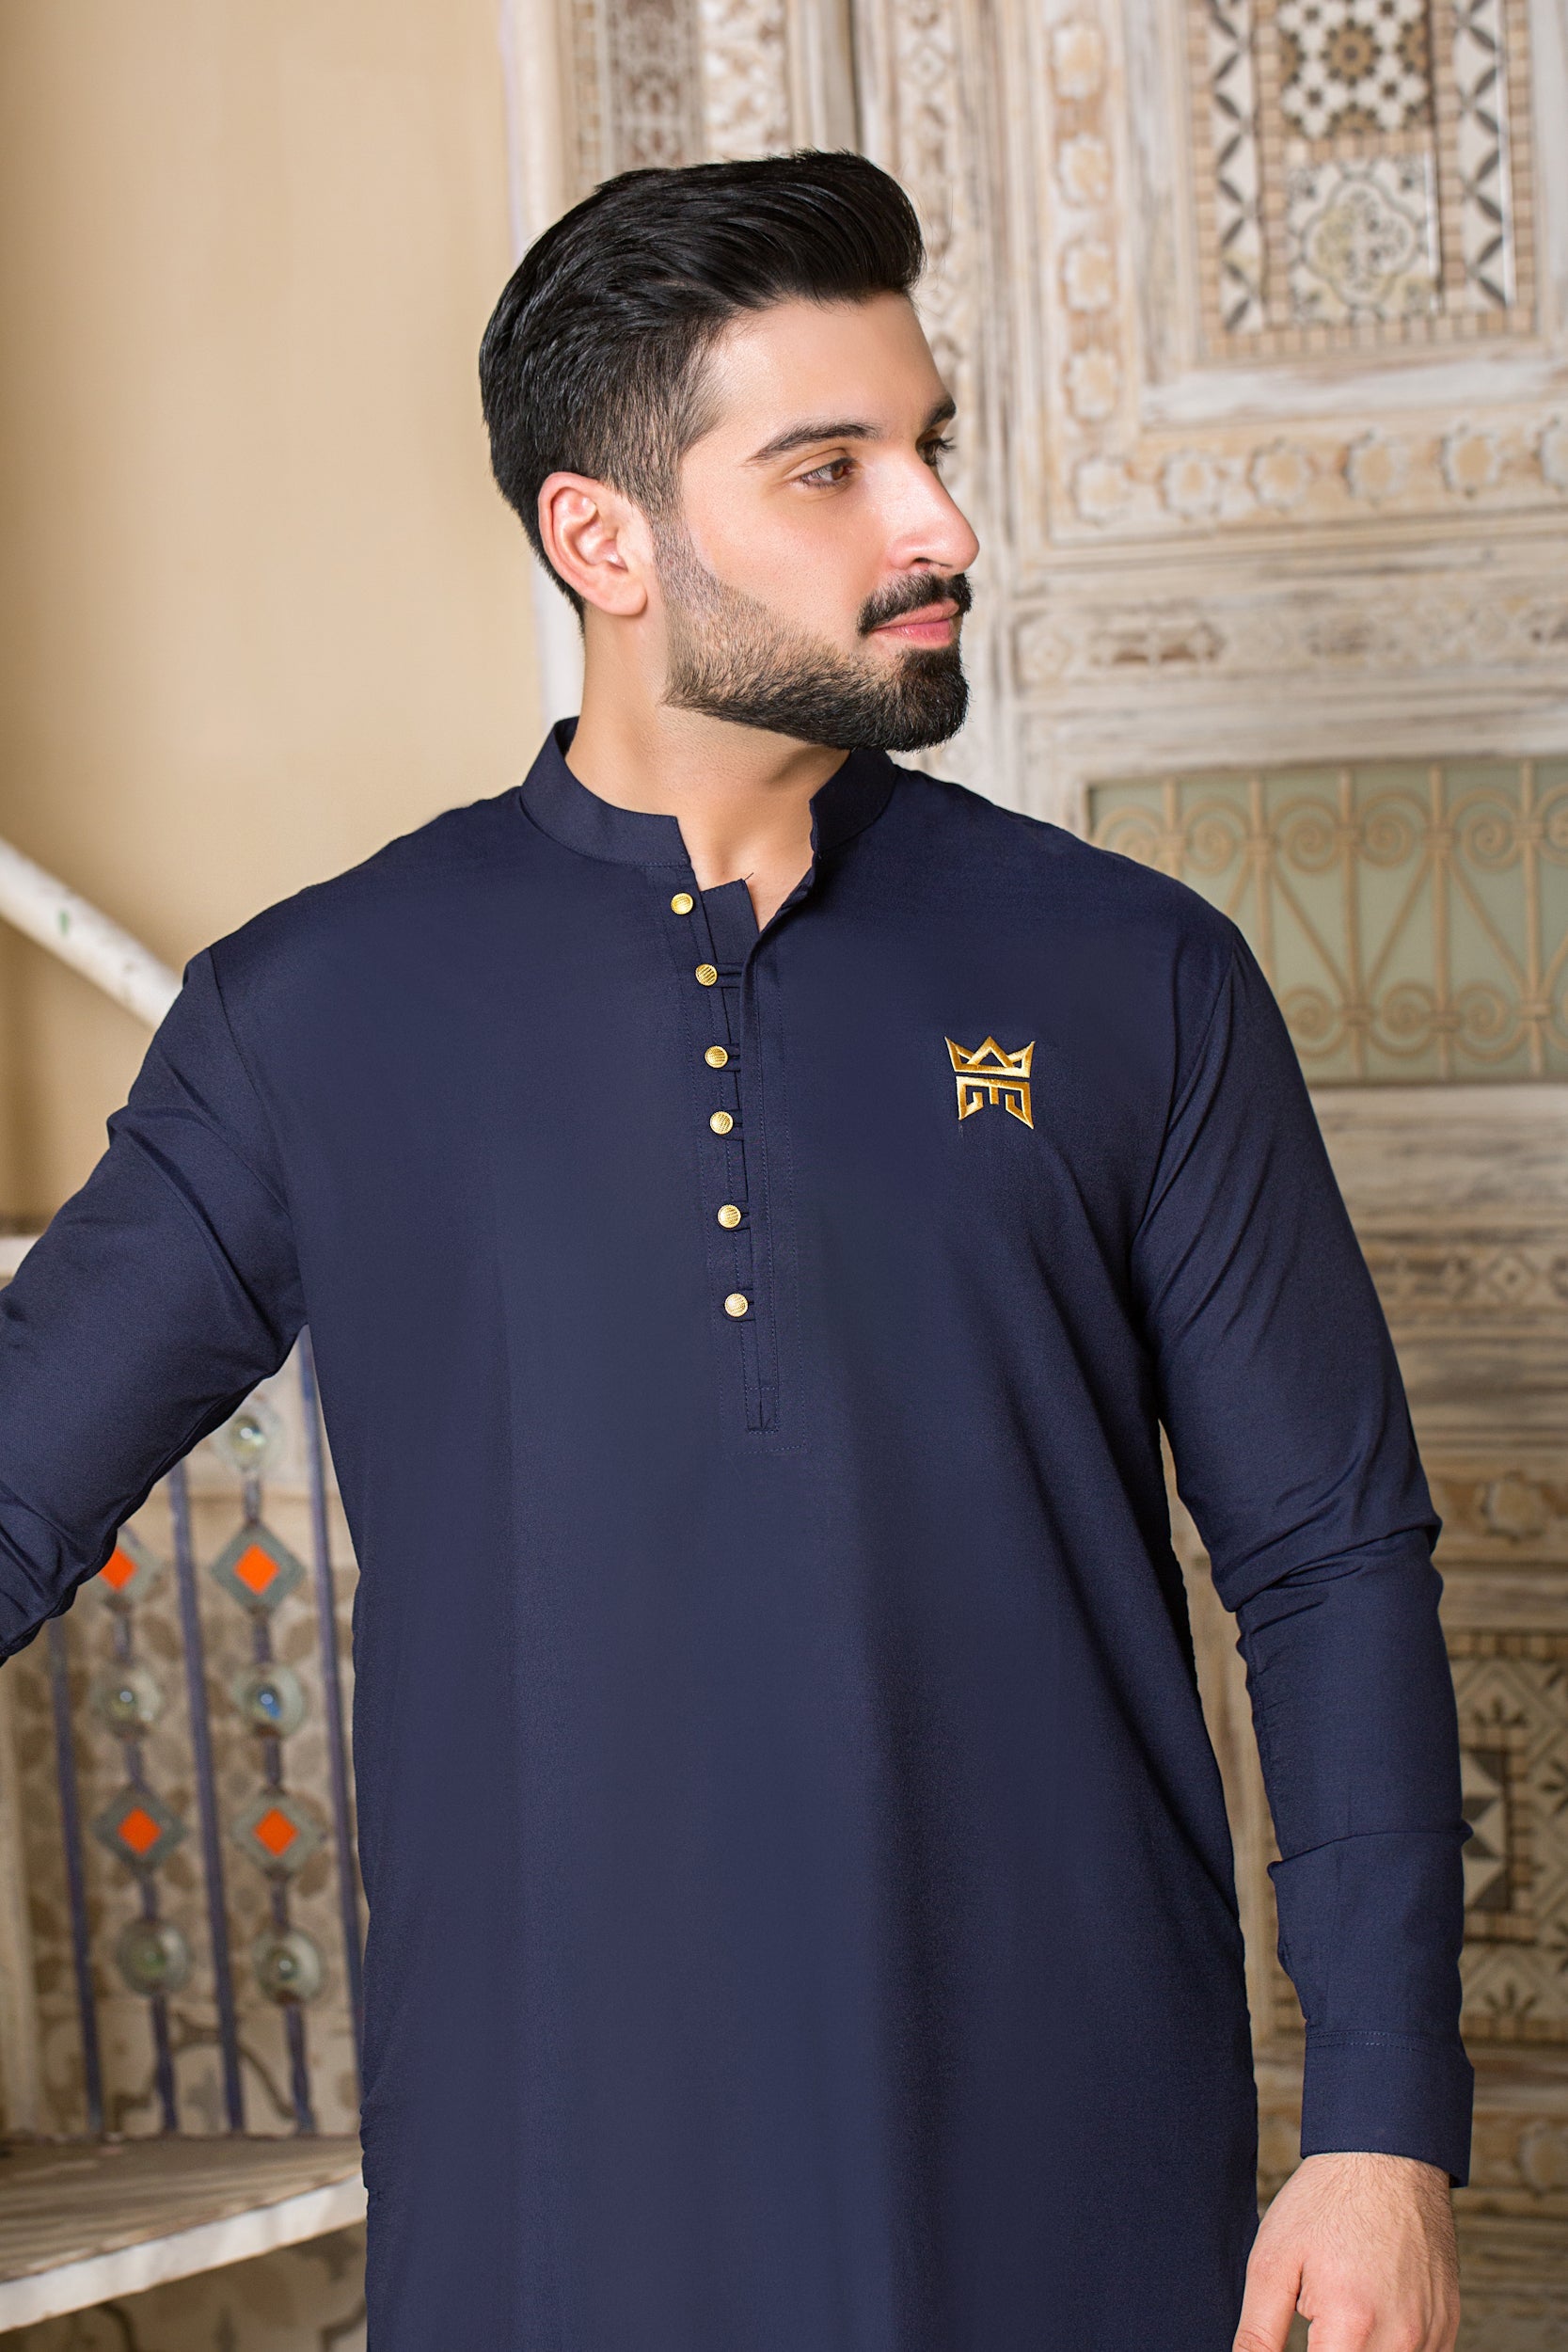 Platinum Logo Collection All Season Stitched Suit with Gold Hook Buttons - Navy